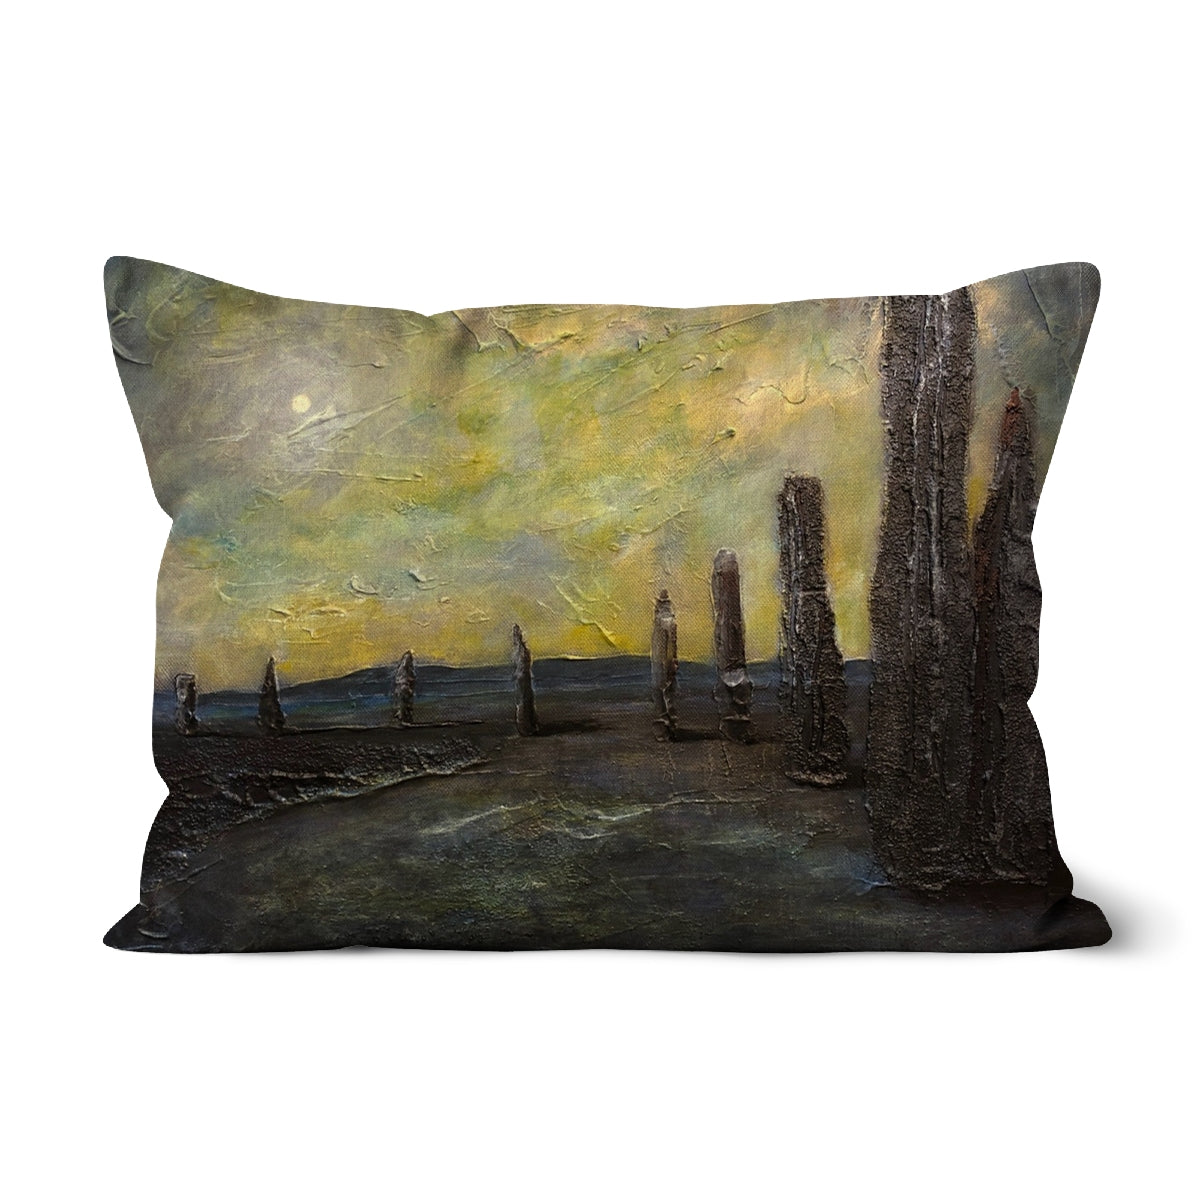 An Ethereal Ring Of Brodgar Art Gifts Cushion-Cushions-Orkney Art Gallery-Canvas-19"x13"-Paintings, Prints, Homeware, Art Gifts From Scotland By Scottish Artist Kevin Hunter